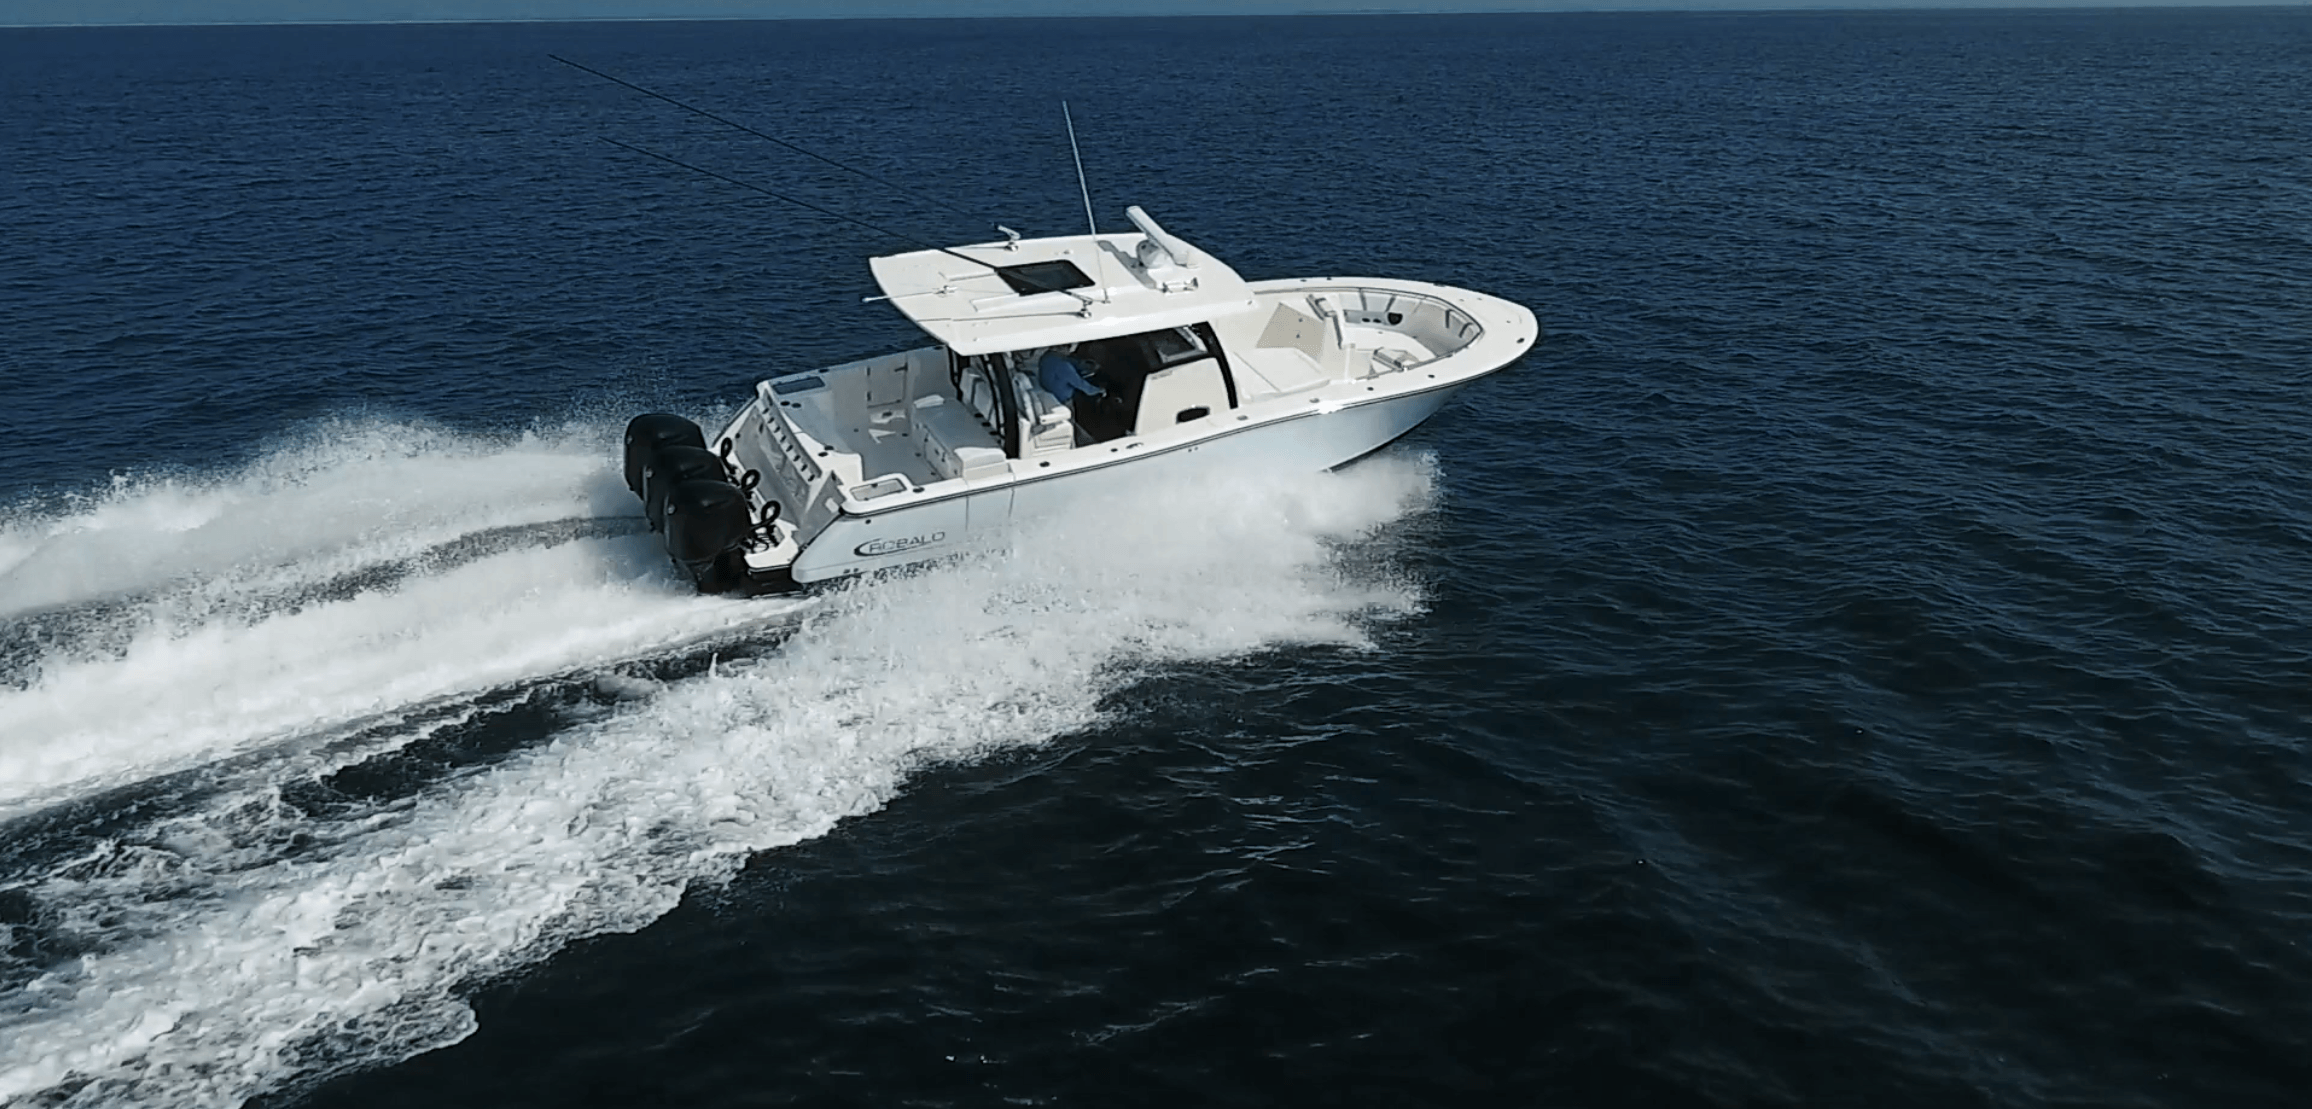 Image Planning a Holiday on the Water The Robalo R360 boat model on the open water with waves